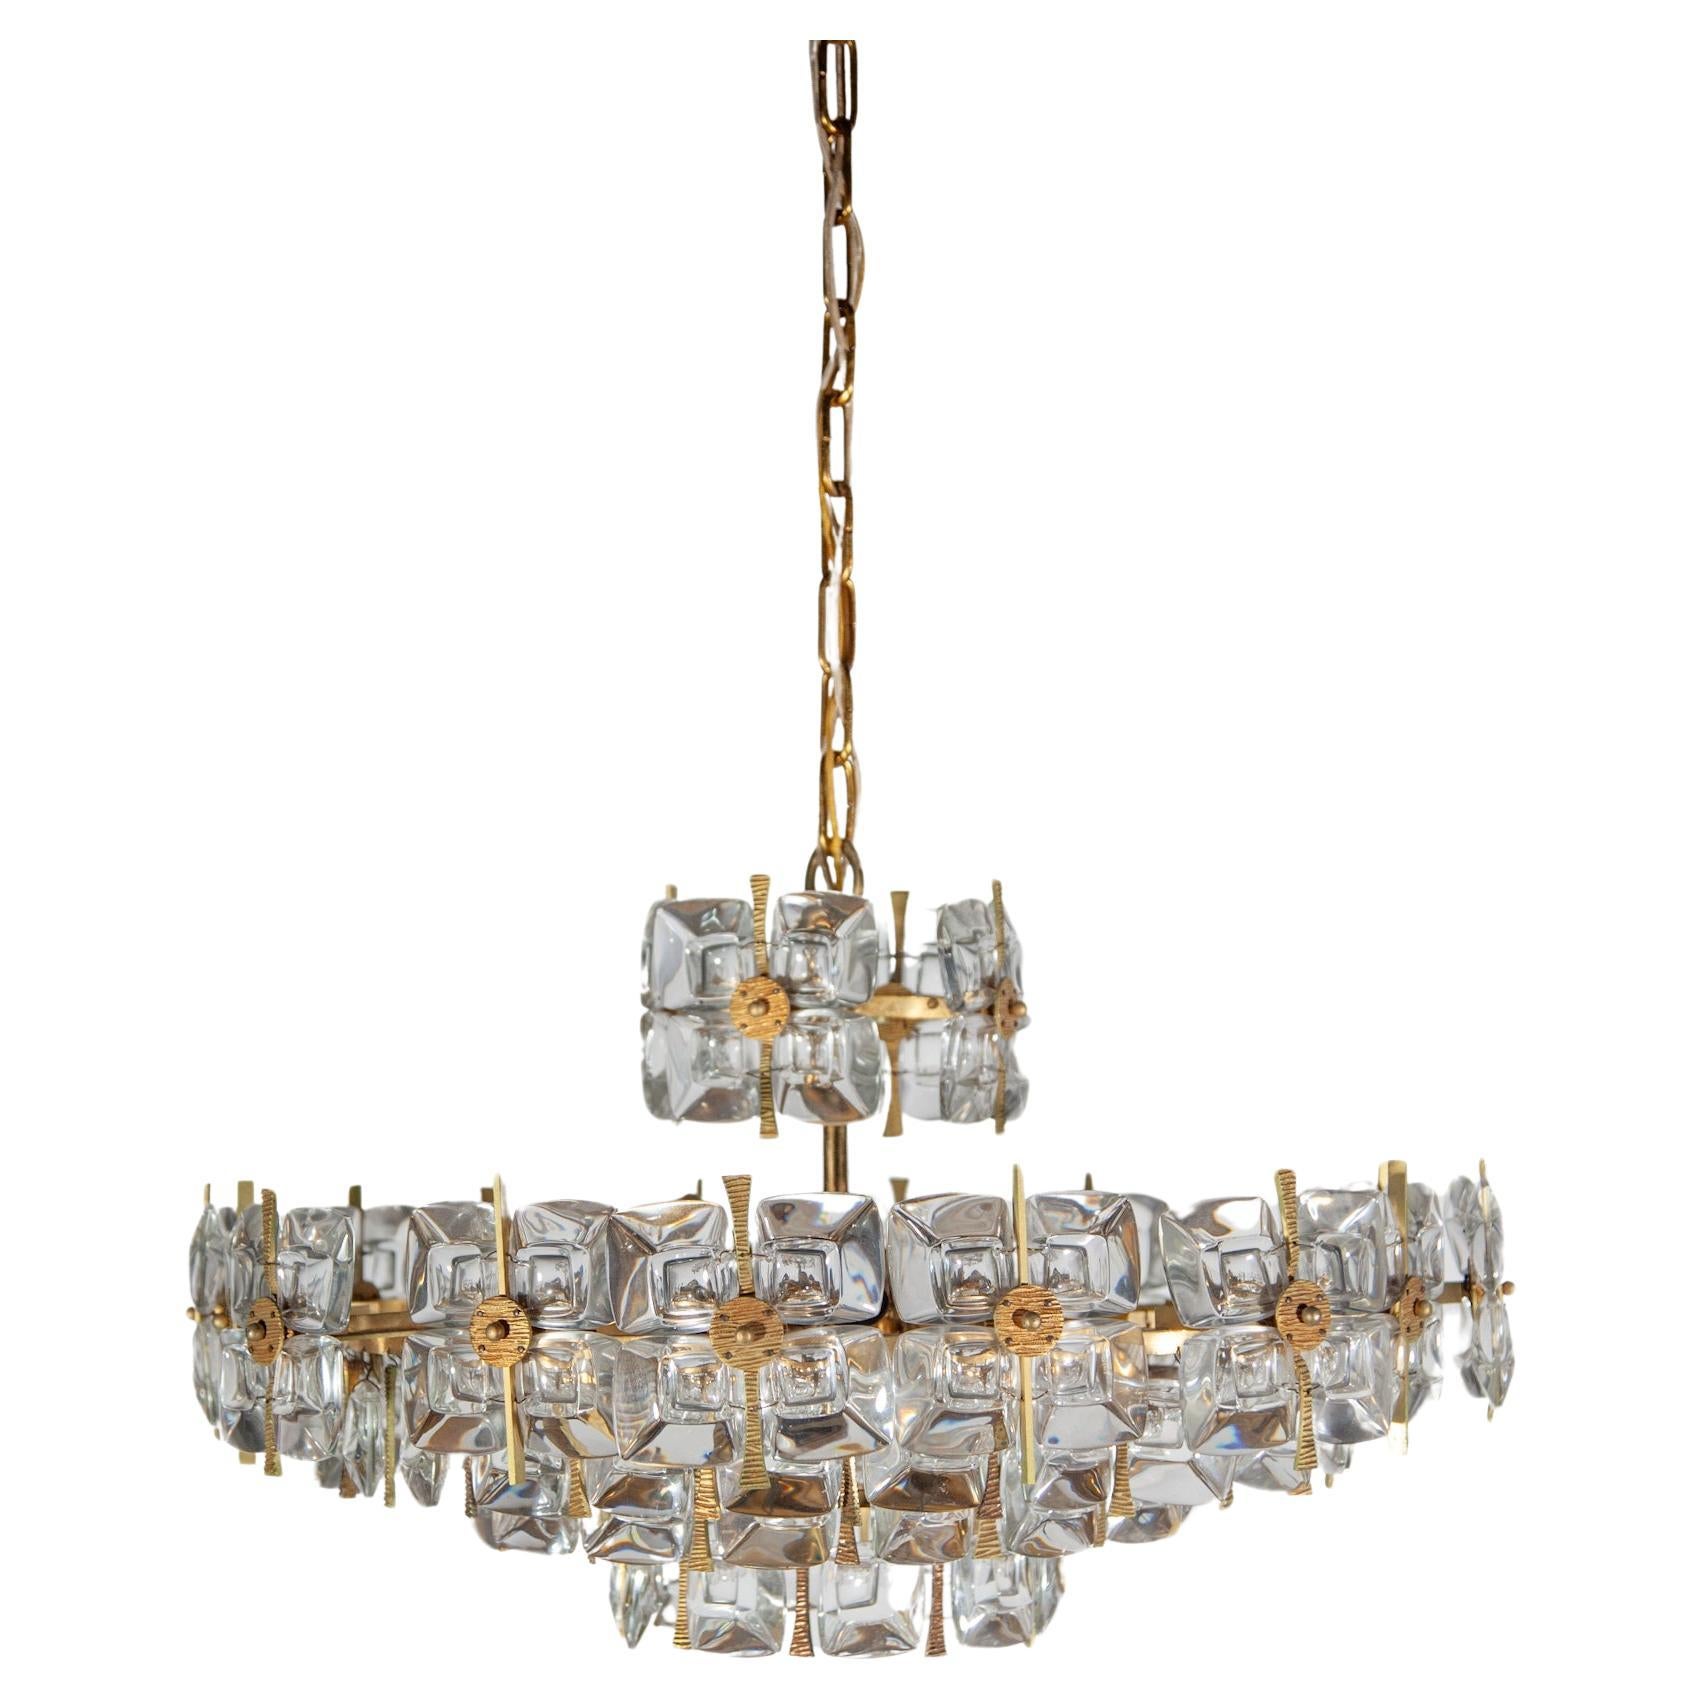 Large vintage Hollywood Regency style gilded brass and glass chandelier designed by Palwa, 1970s, Germany. The facetted glass parts look like huge jewels. A fantastic quality and in a very good original condition.